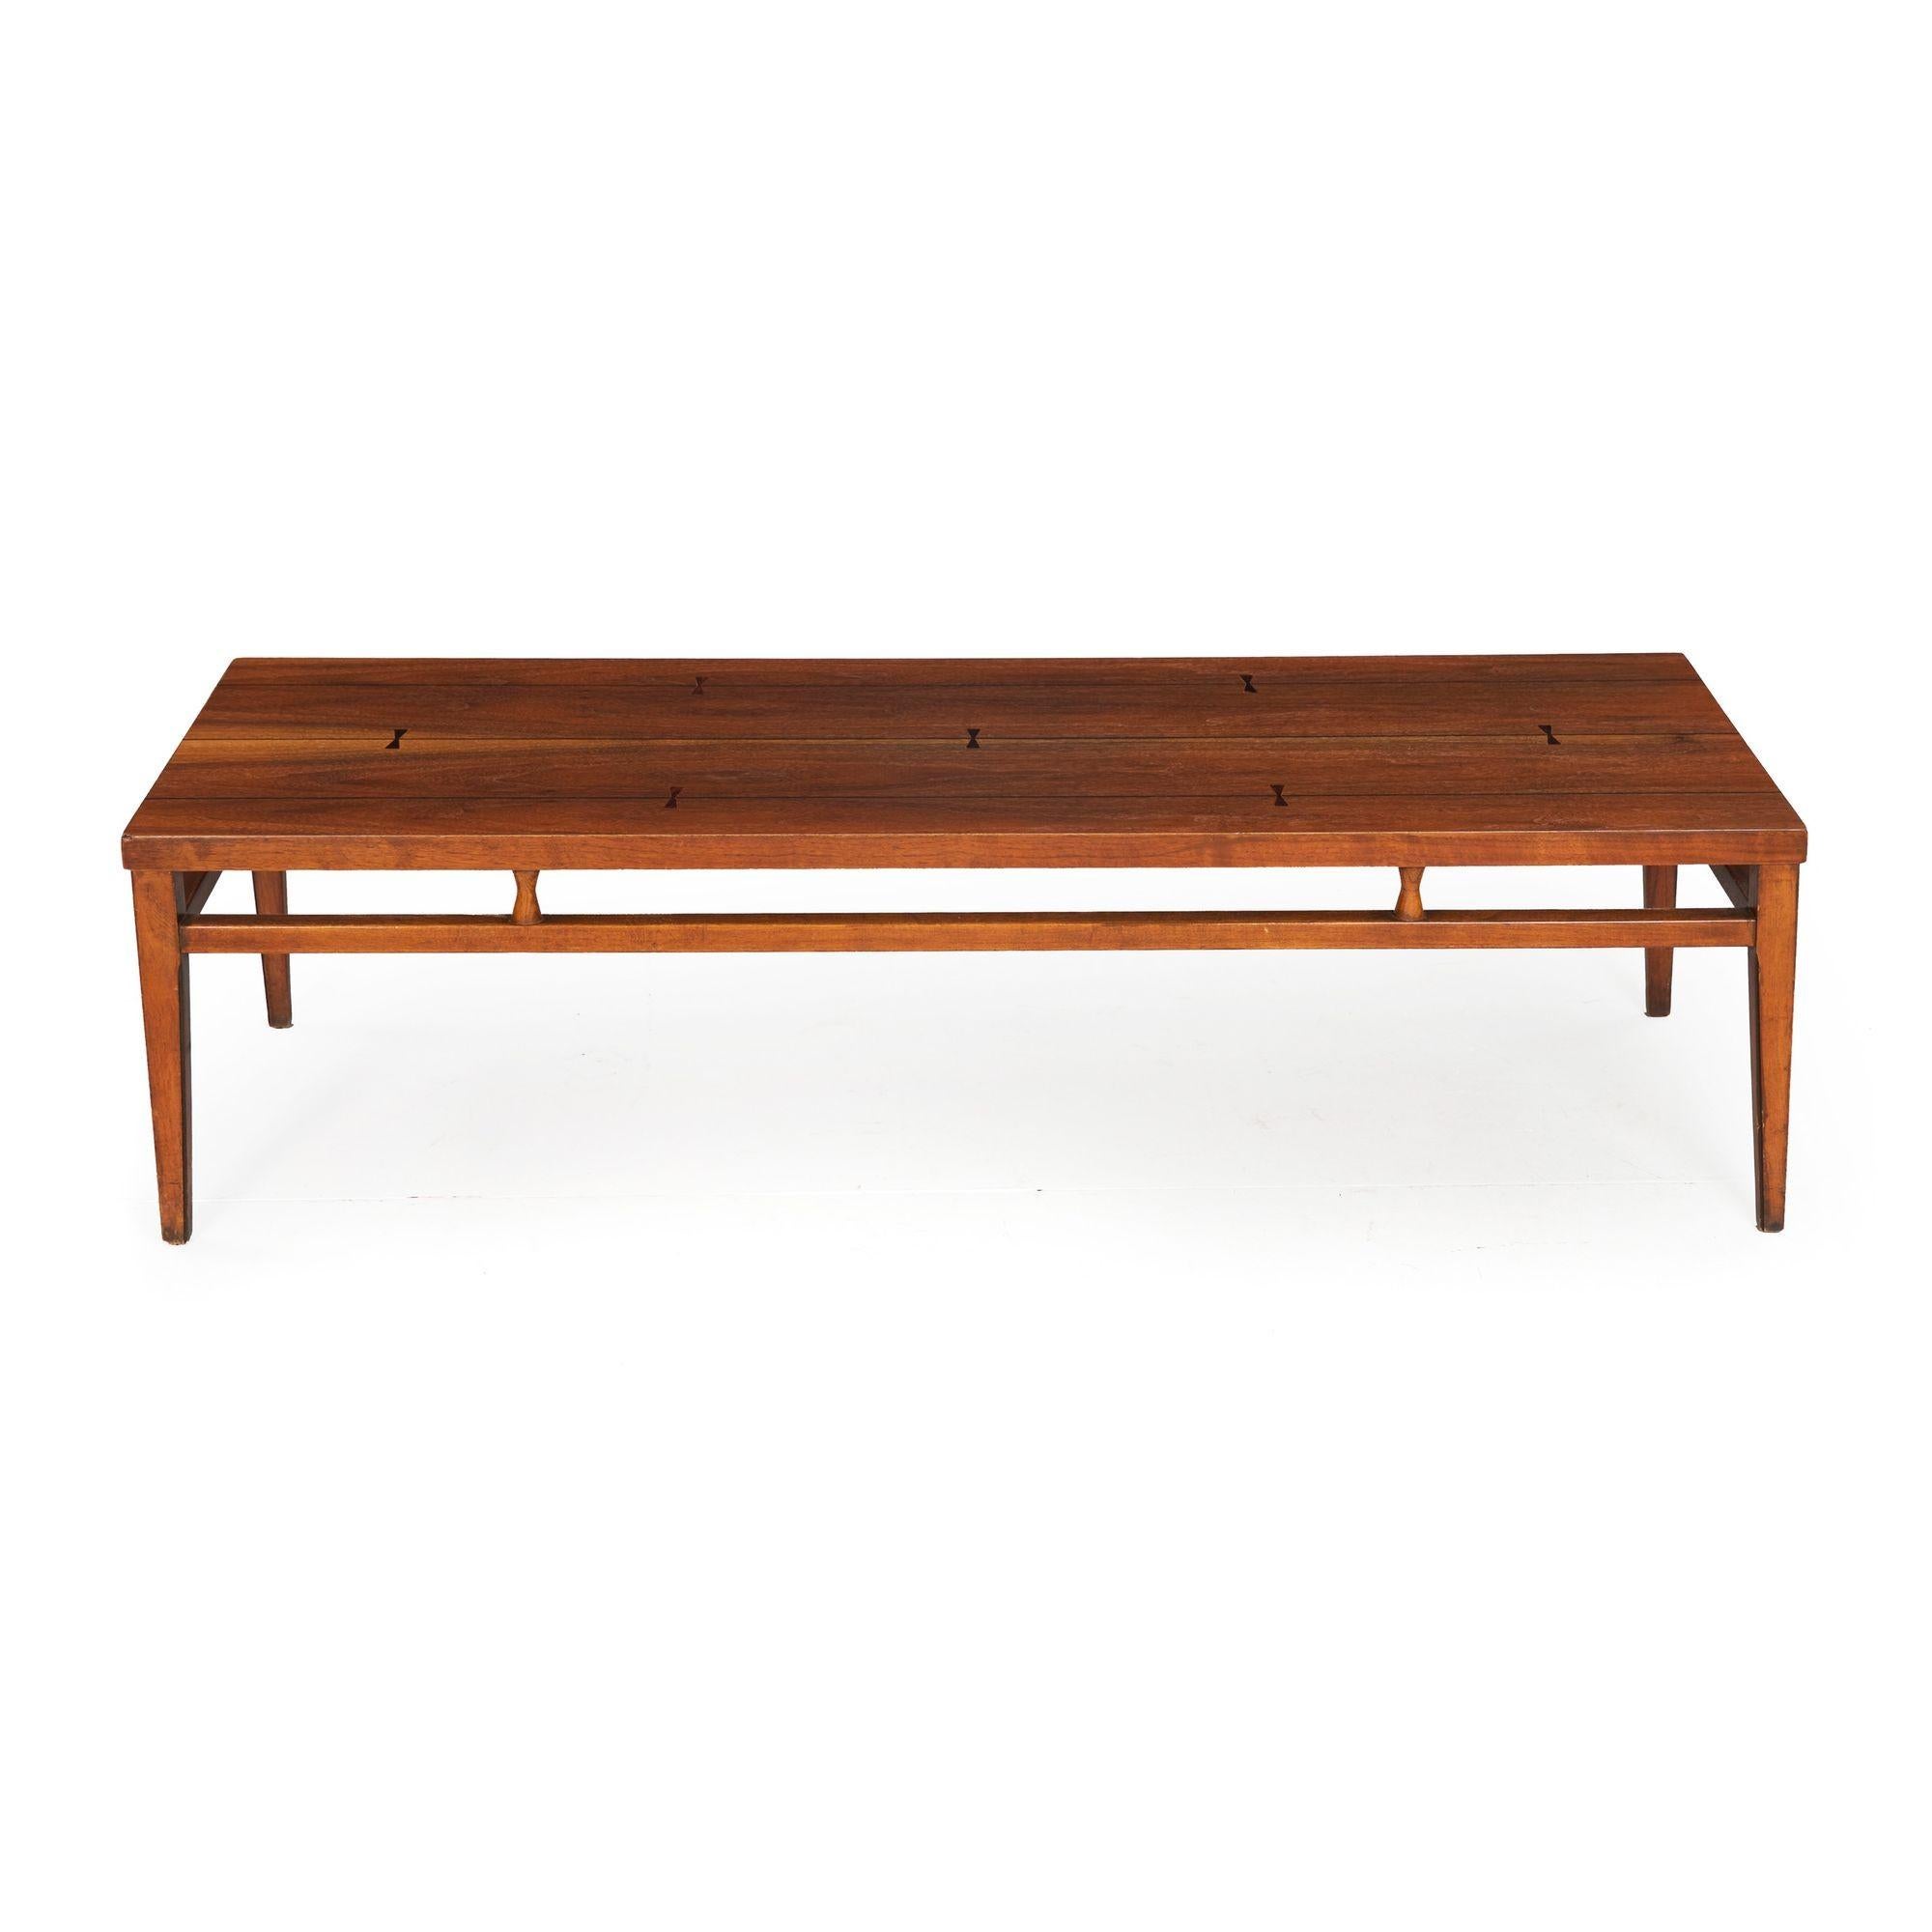 A very sleek coffee table from Lane's coveted 